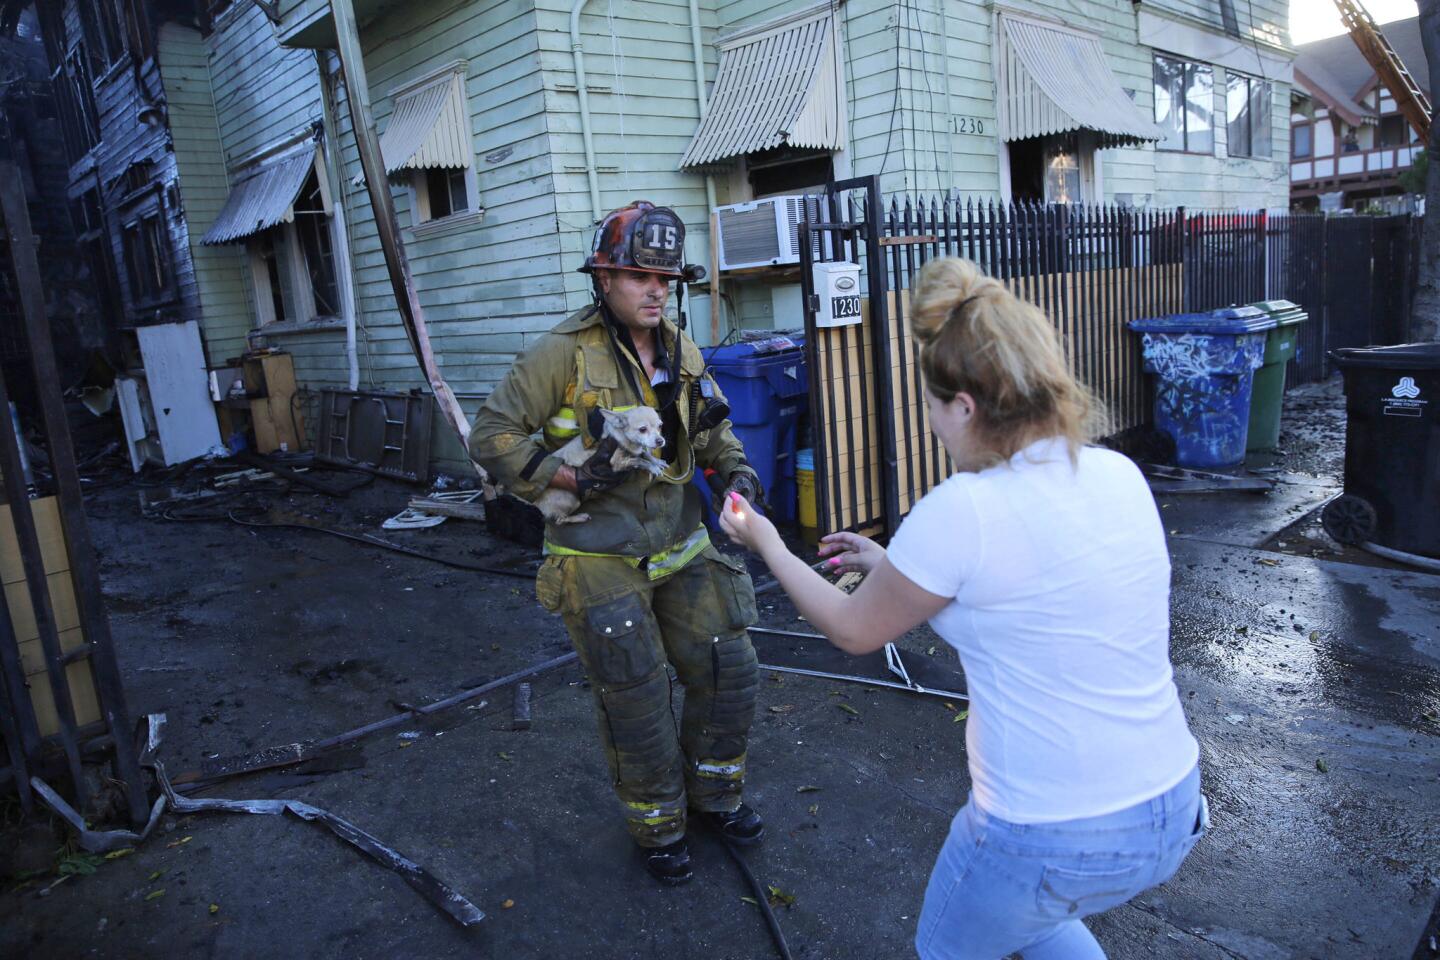 Los Angeles firefighter Nicolas Avila rescues a small dog from a house fire. One other dog died in the blaze on the 1200 block of South Bonnie Brae Street.